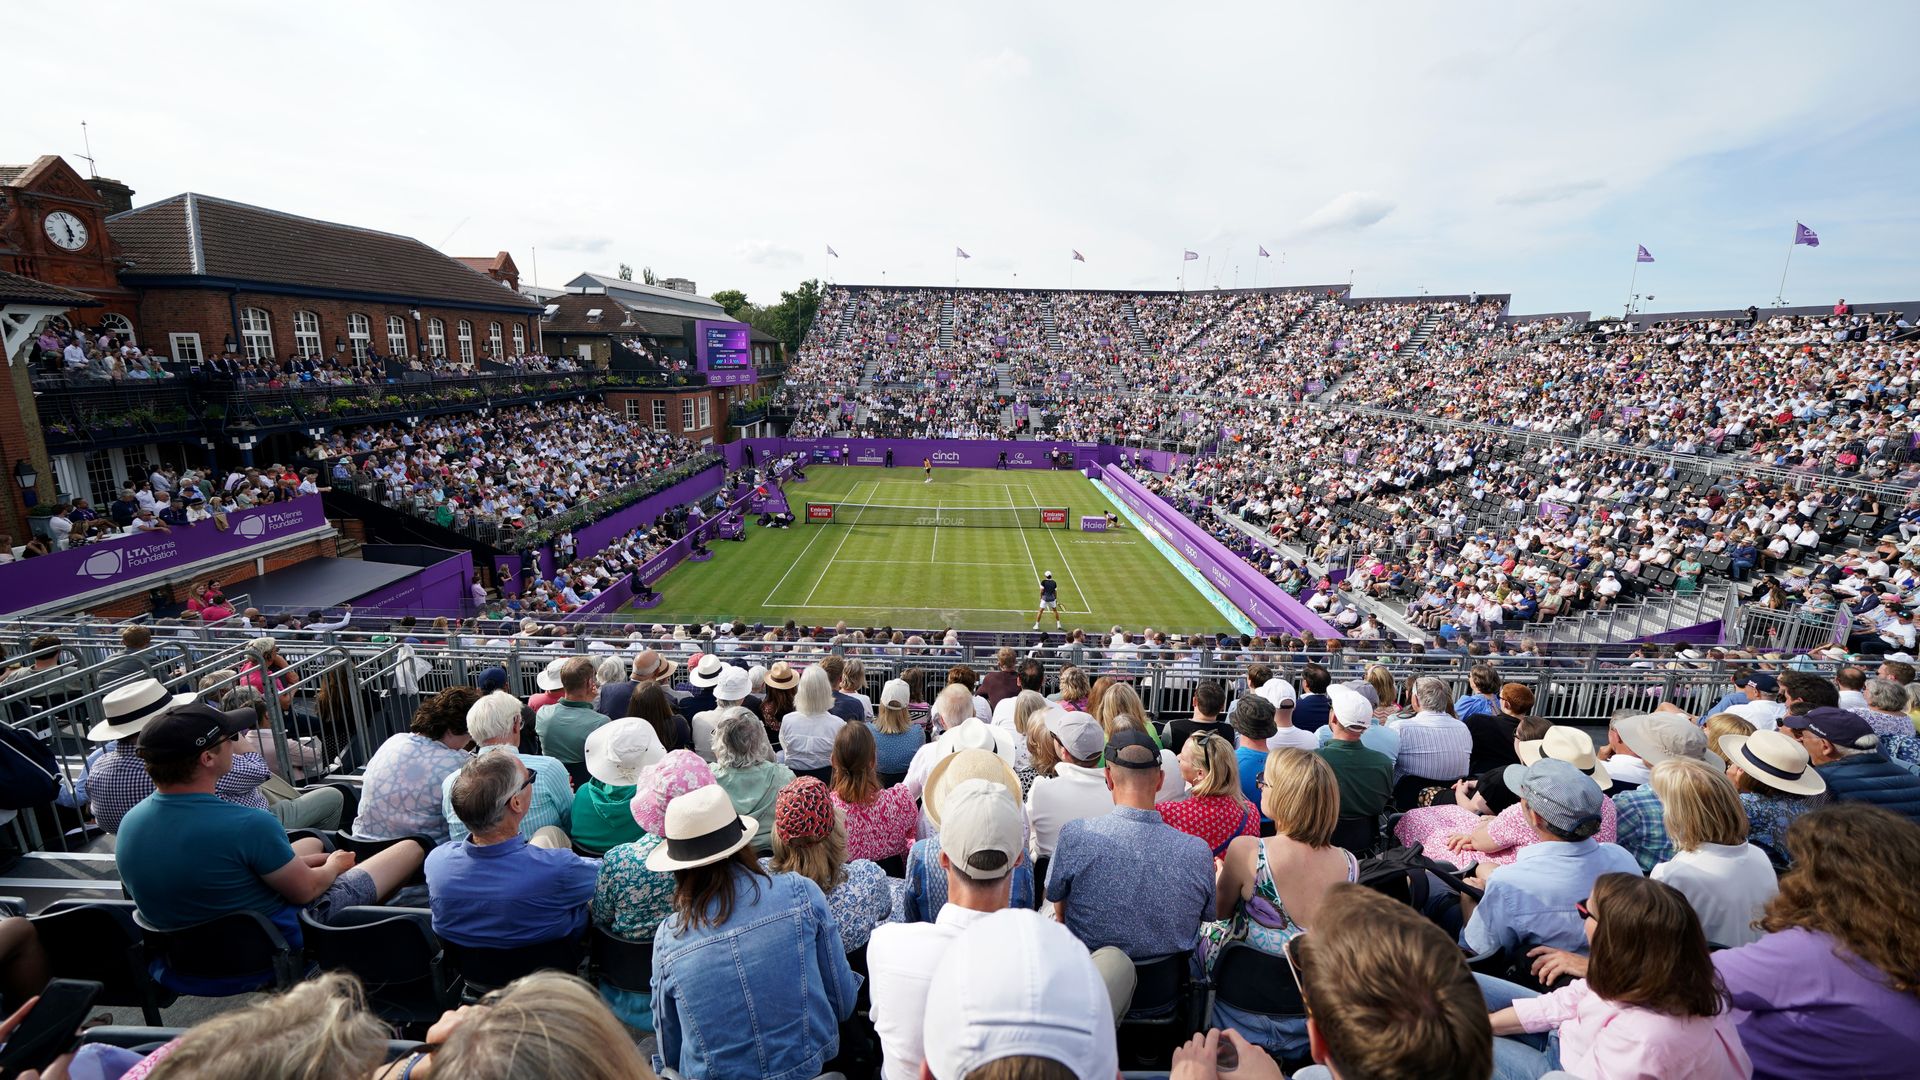 WTA 'open to exploring' women's event at Queen's Club